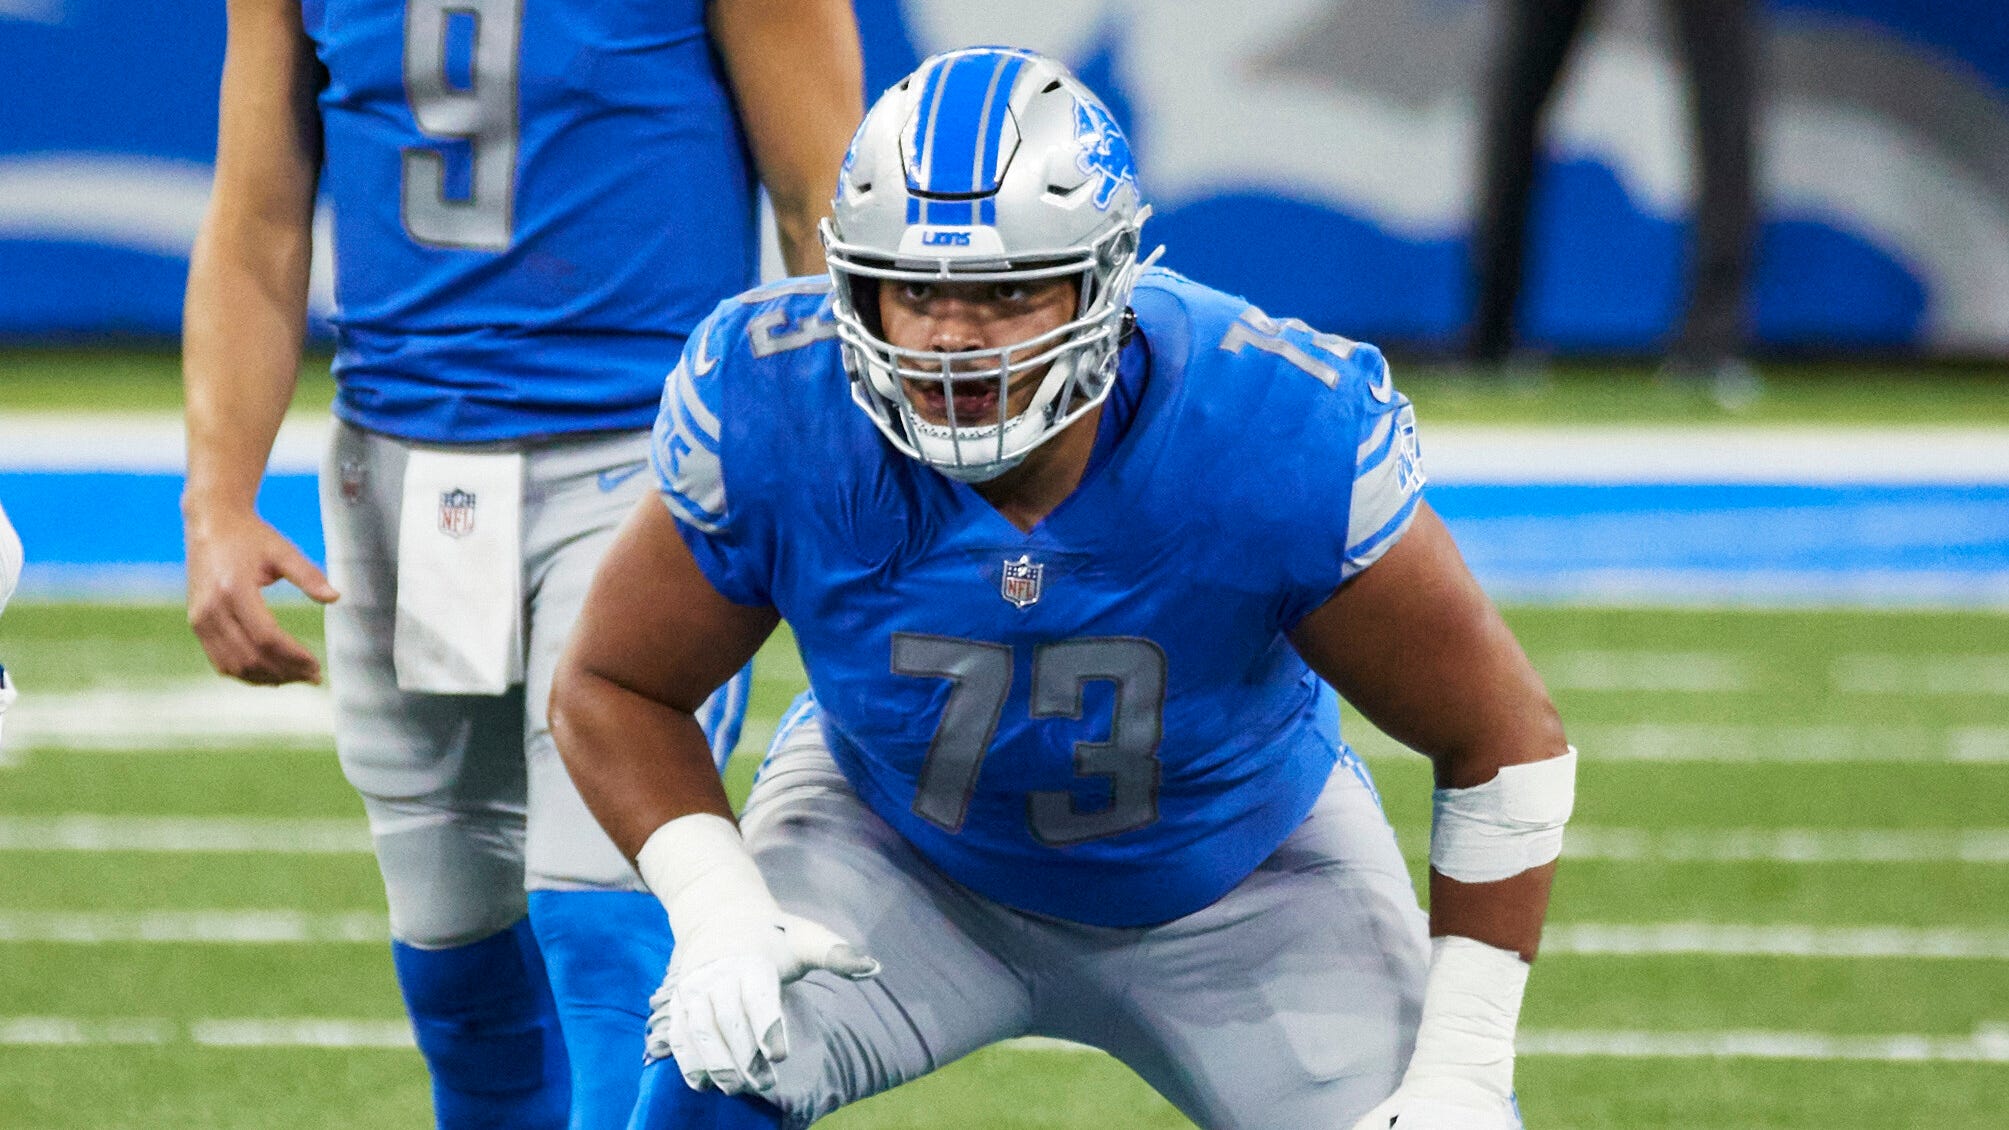 Jonah Jackson gets set before the snap to Matthew Stafford on Sunday against the Colts.